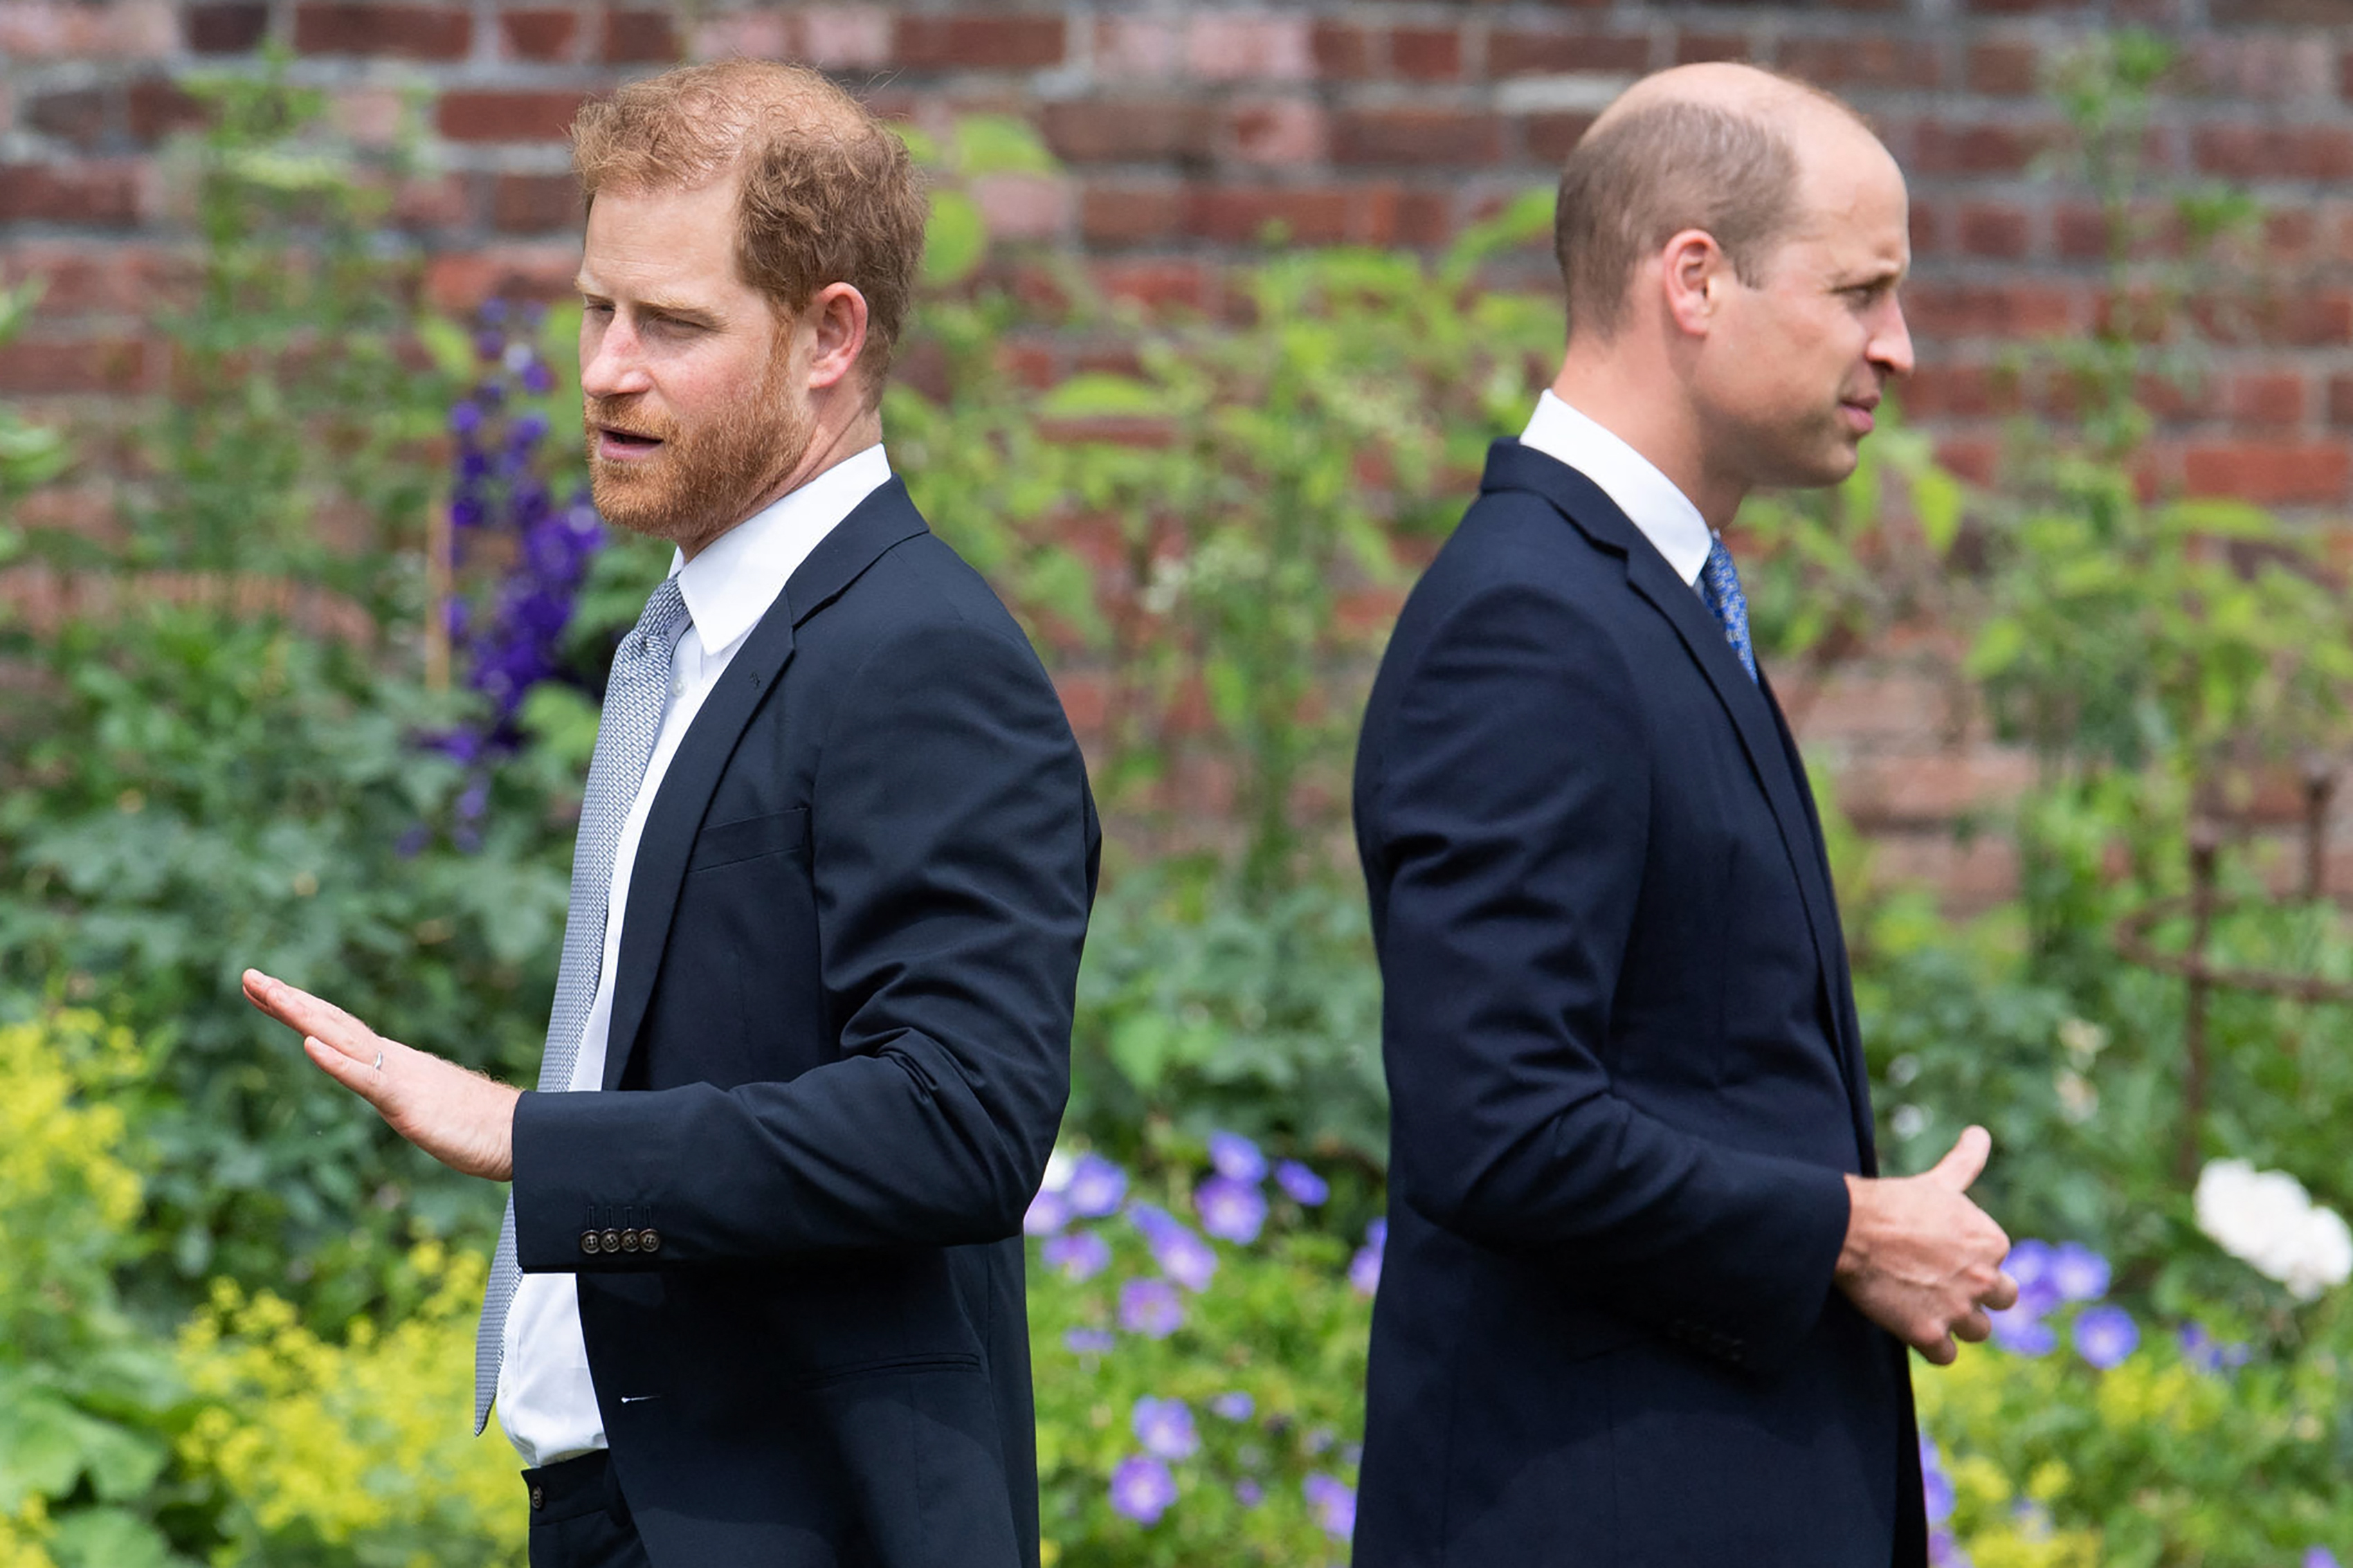 Princes William and Harry at The Sunken Garden in Kensington Palace, London on July 1, 2021 | Source: Getty Images